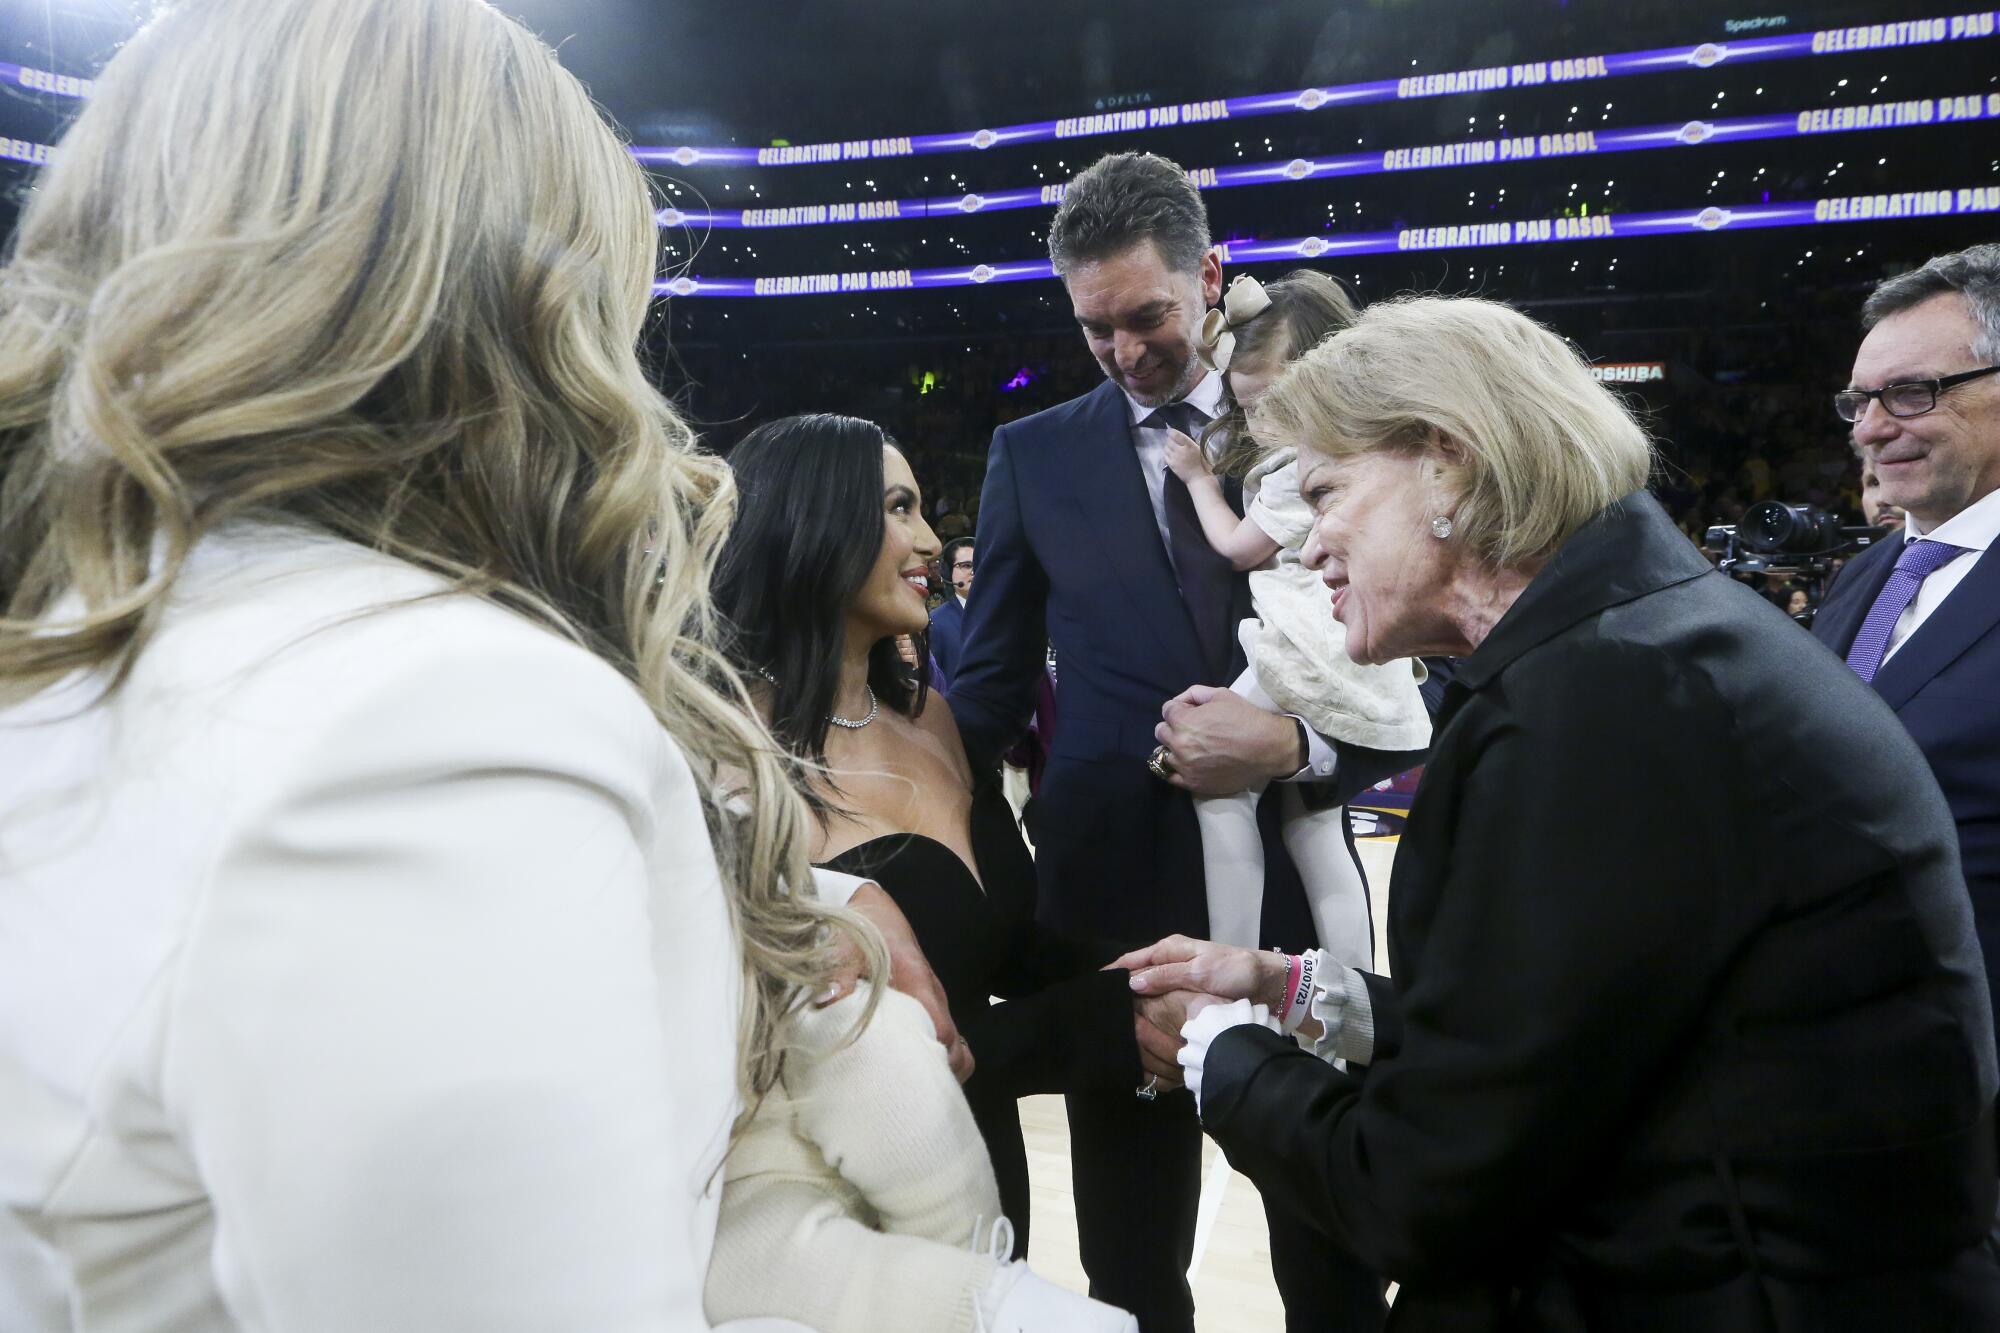 Vanessa Leaves Pau Gasol In Tears With Kobe Bryant Message At